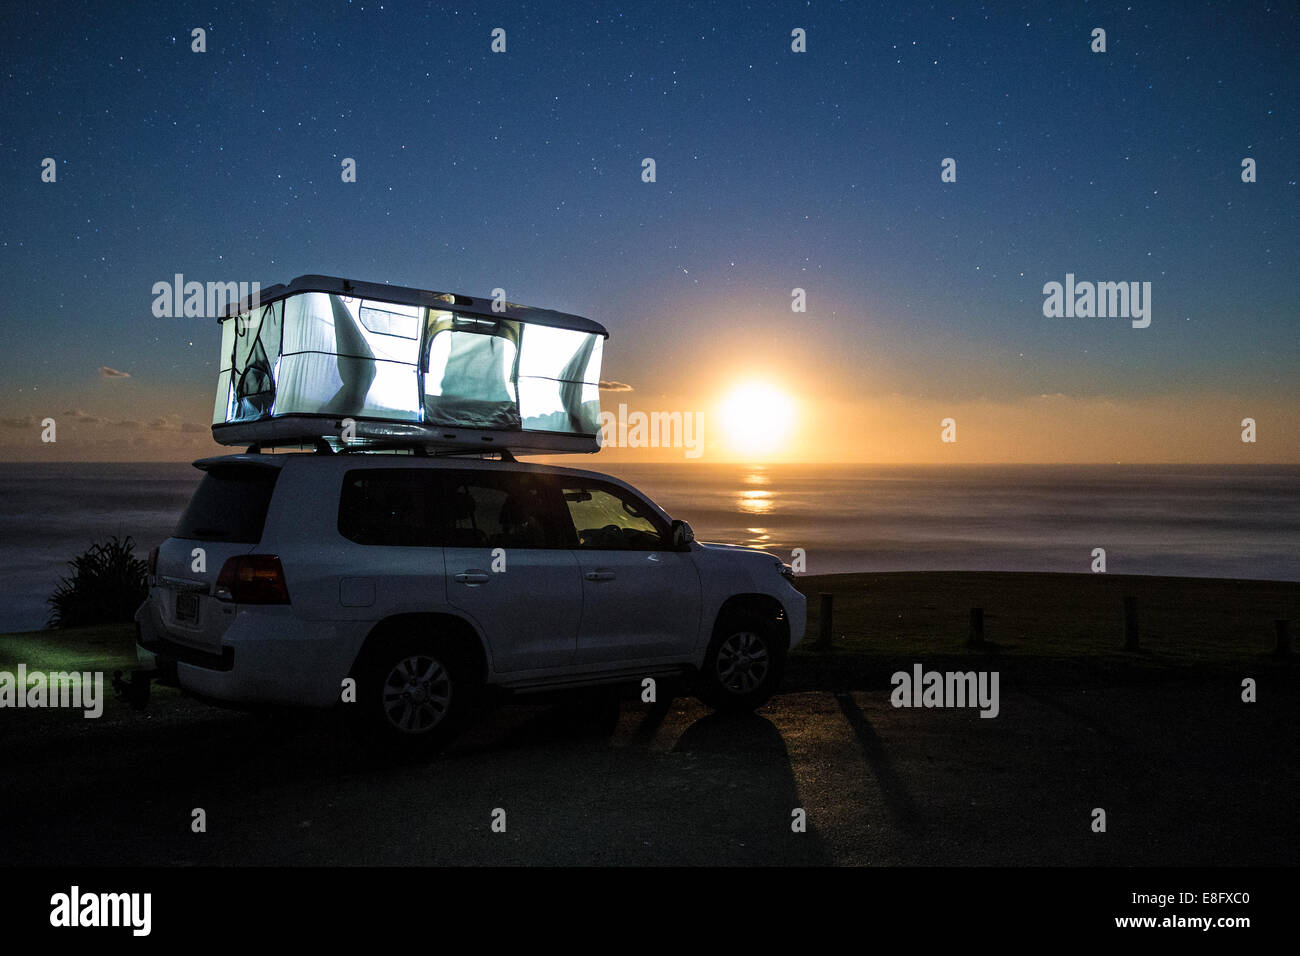 Sleeping tent on top of car at sunset Stock Photo